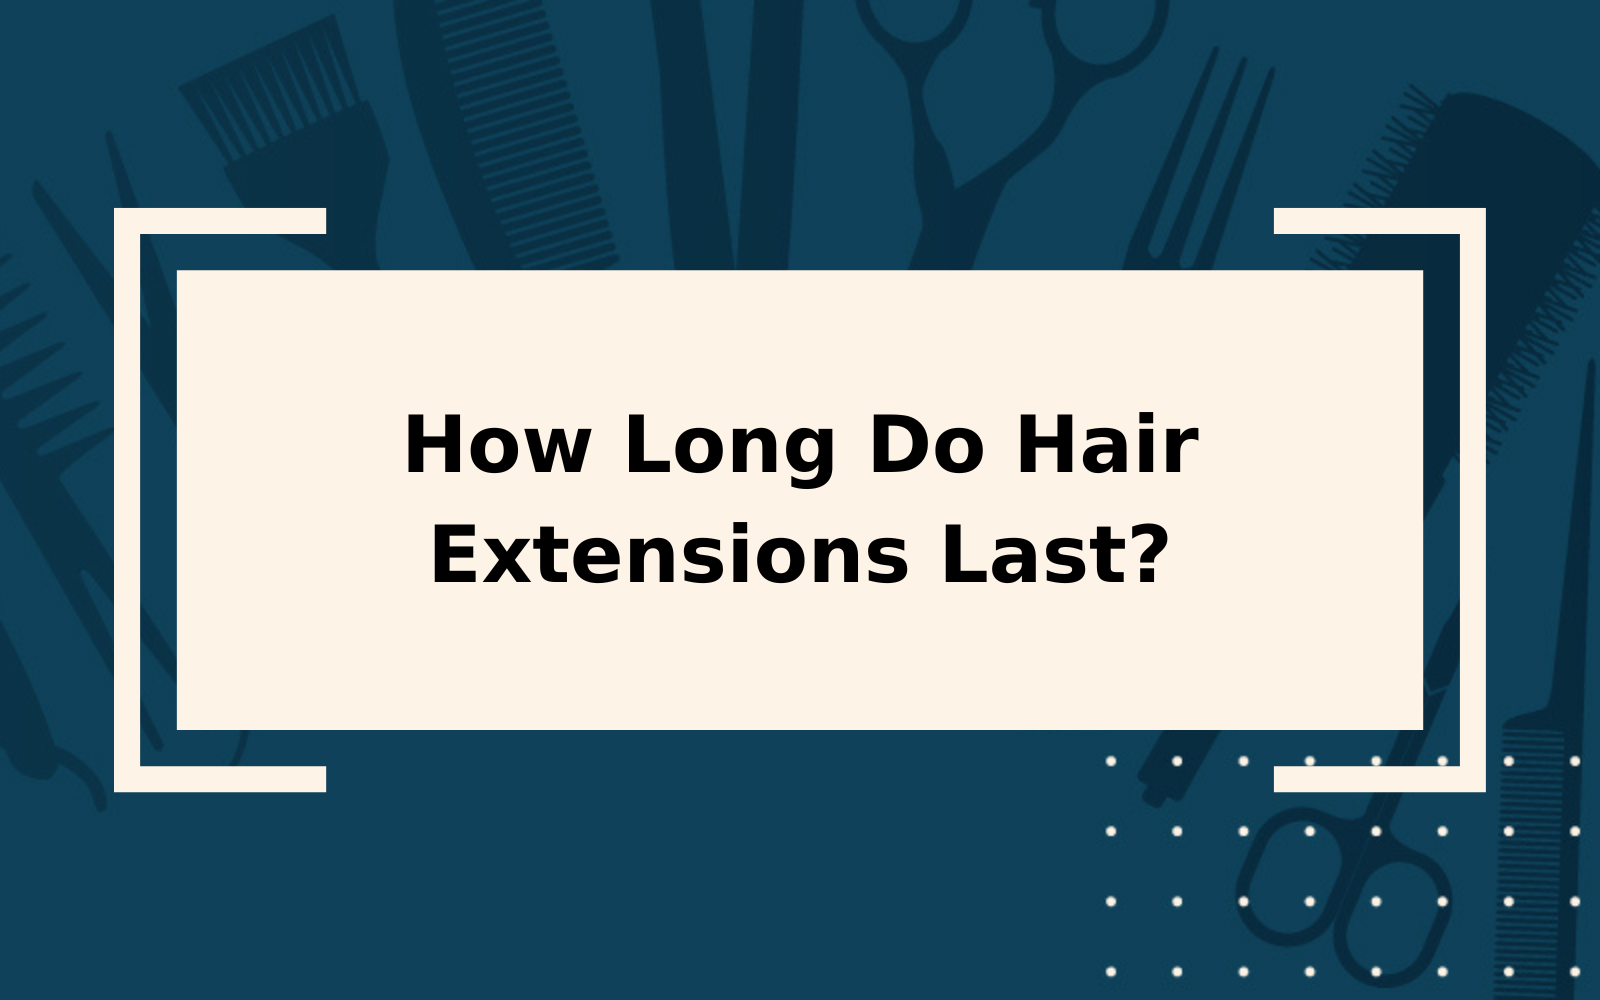 How Long Do Hair Extensions Last? | Not Long, Actually